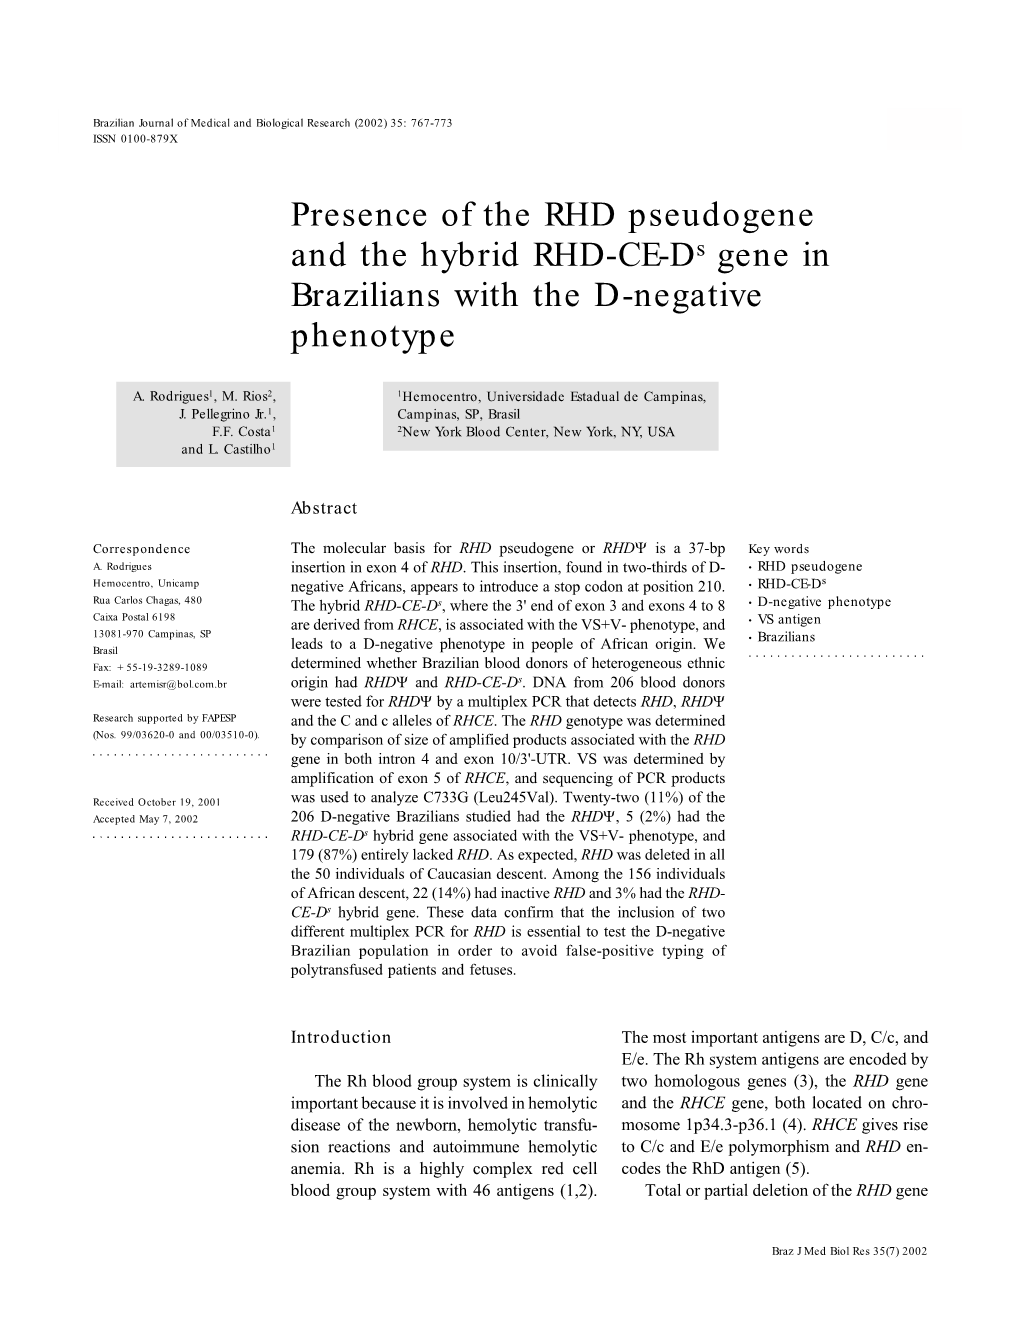 Presence of the RHD Pseudogene and the Hybrid RHD-CE-Ds Gene in Brazilians with the D-Negative Phenotype